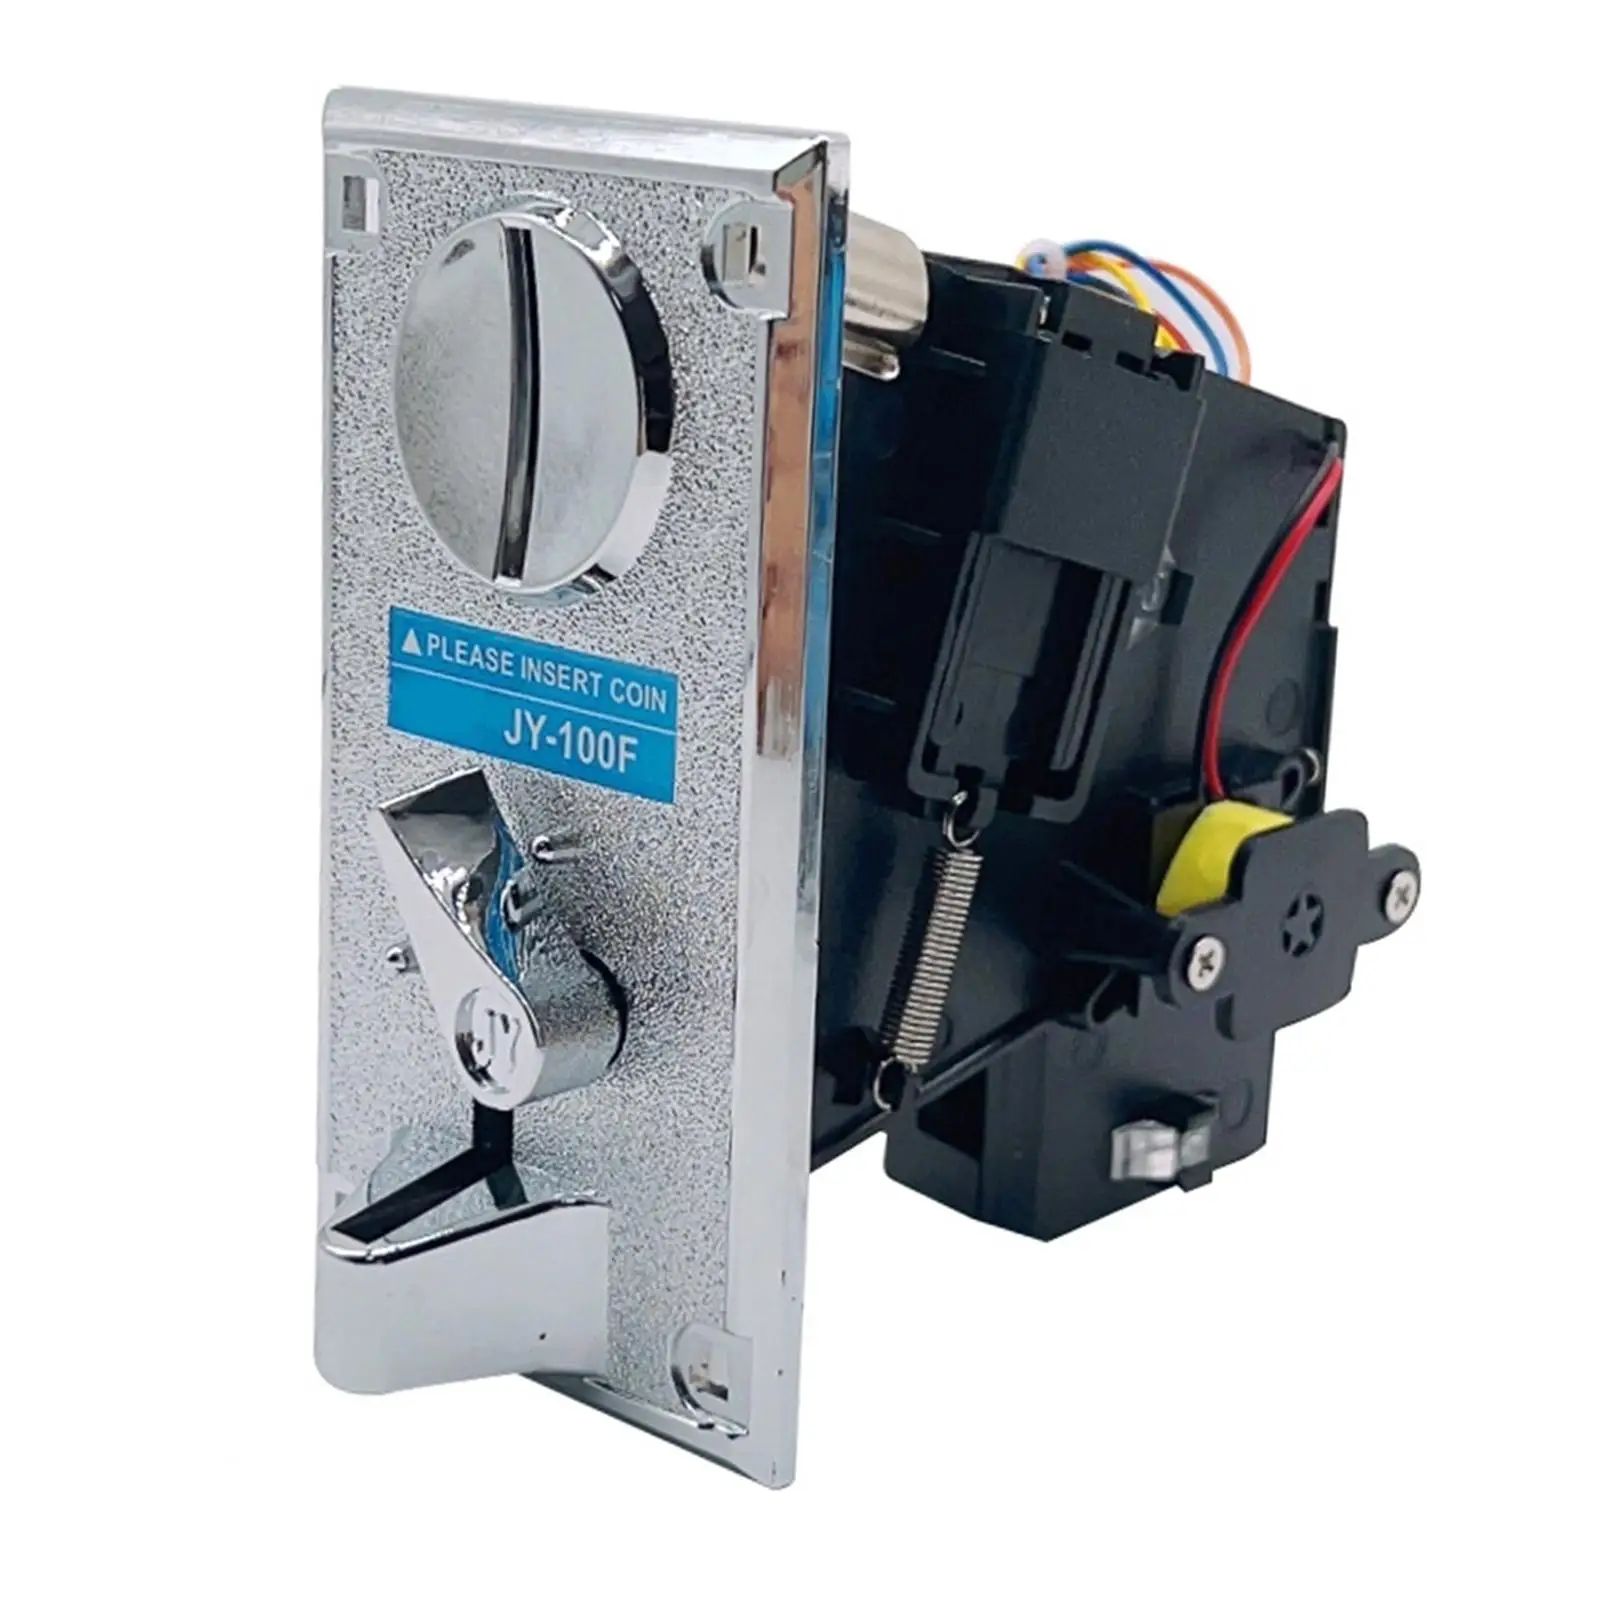 Coin Acceptor Selector Jy-100F Comparative for Street Basketball Attachments